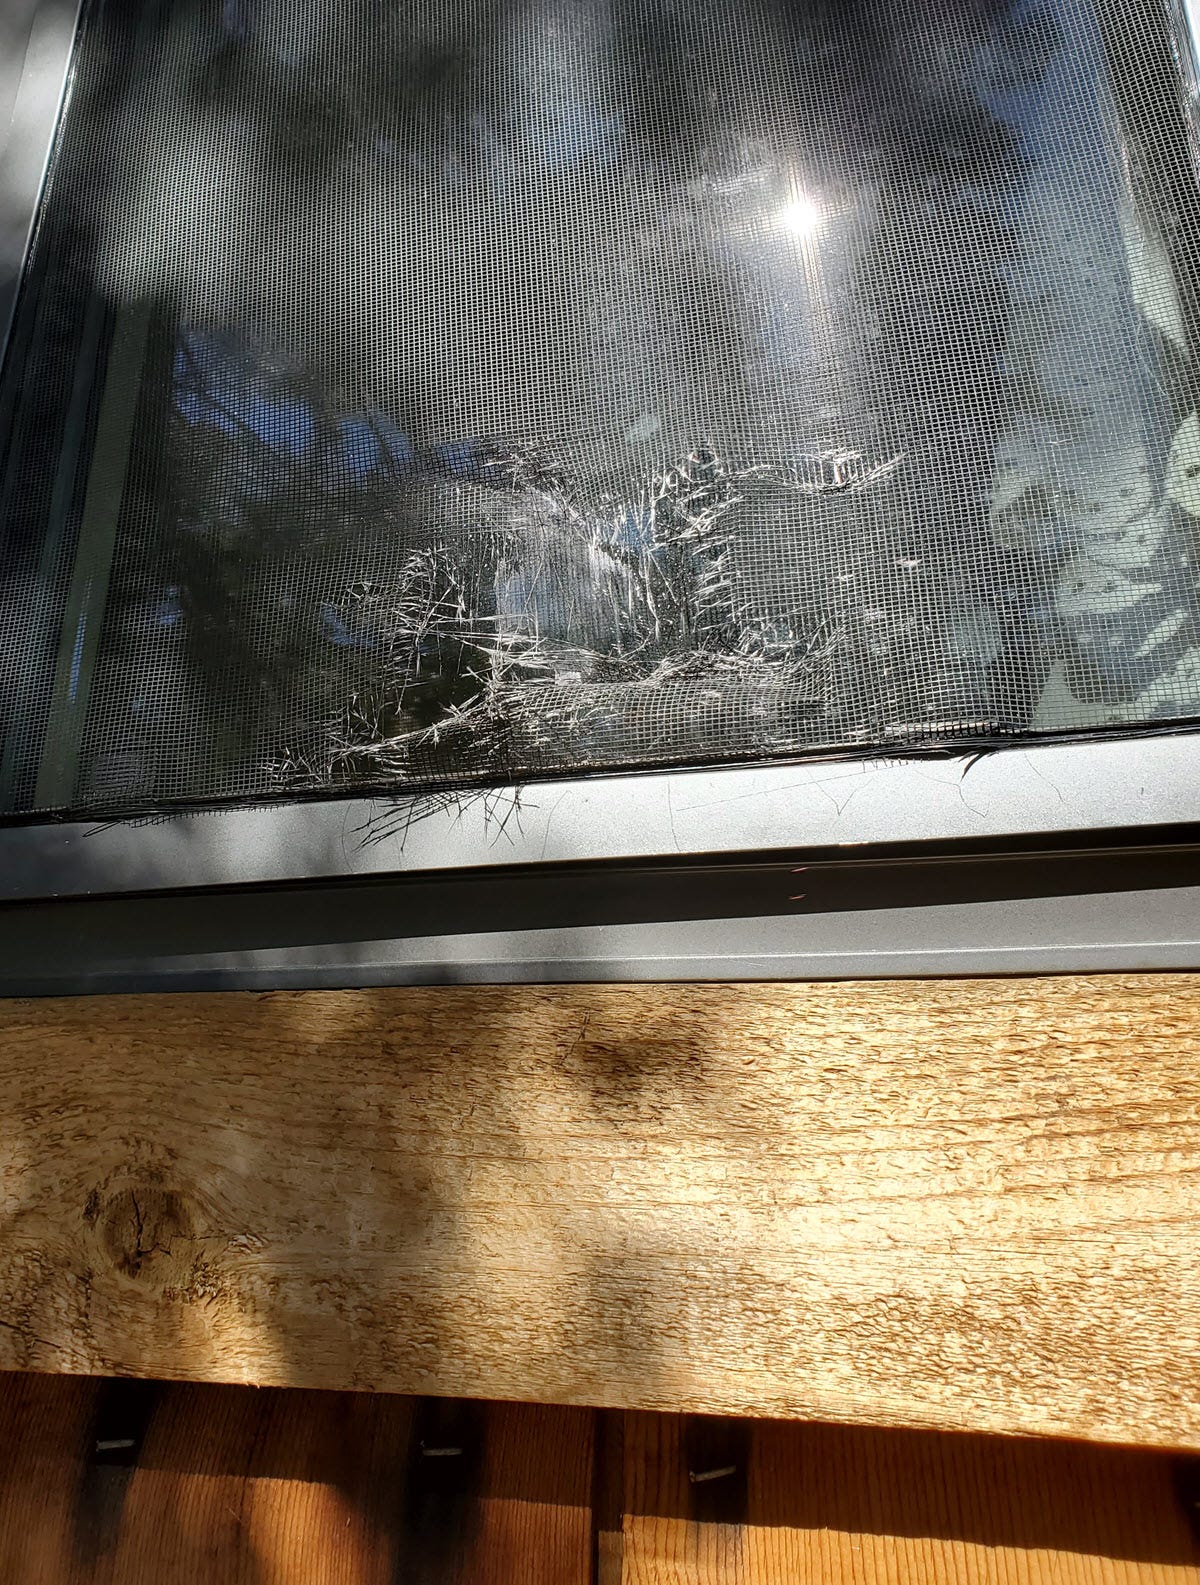 Image: a window screen with a large tear caused by bear claws